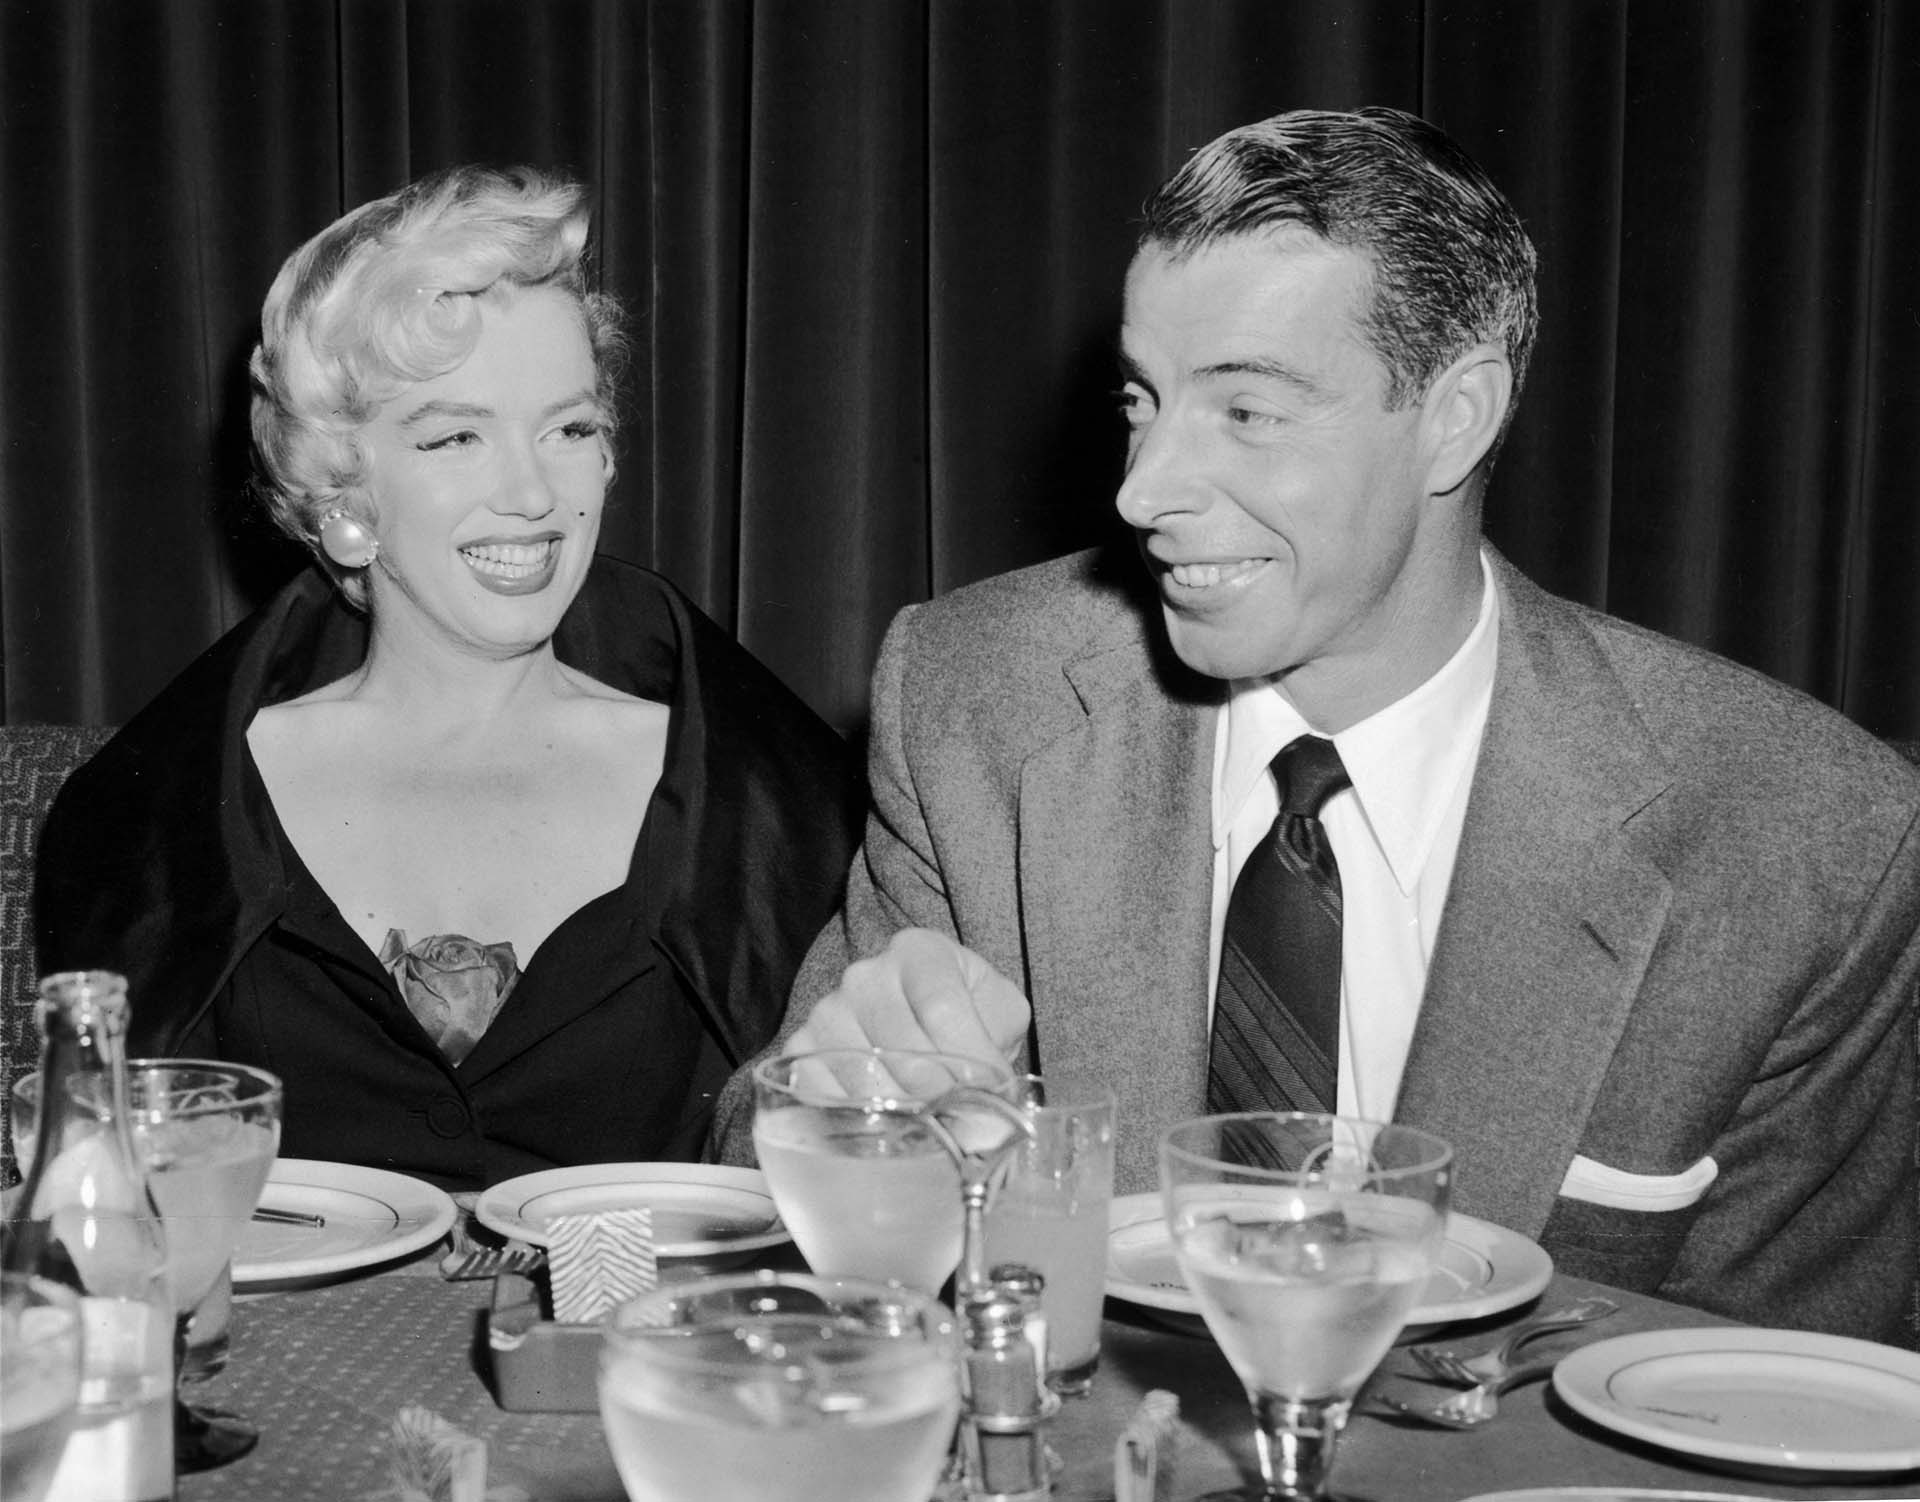 12th September 1954:  A portrait of Marilyn Monroe (1926  - 1962) sitting with her husband Joe DiMaggio (1914 - 1999) at El Morocco, New York City, New York.  (Photo by Hulton Archive/Getty Images)